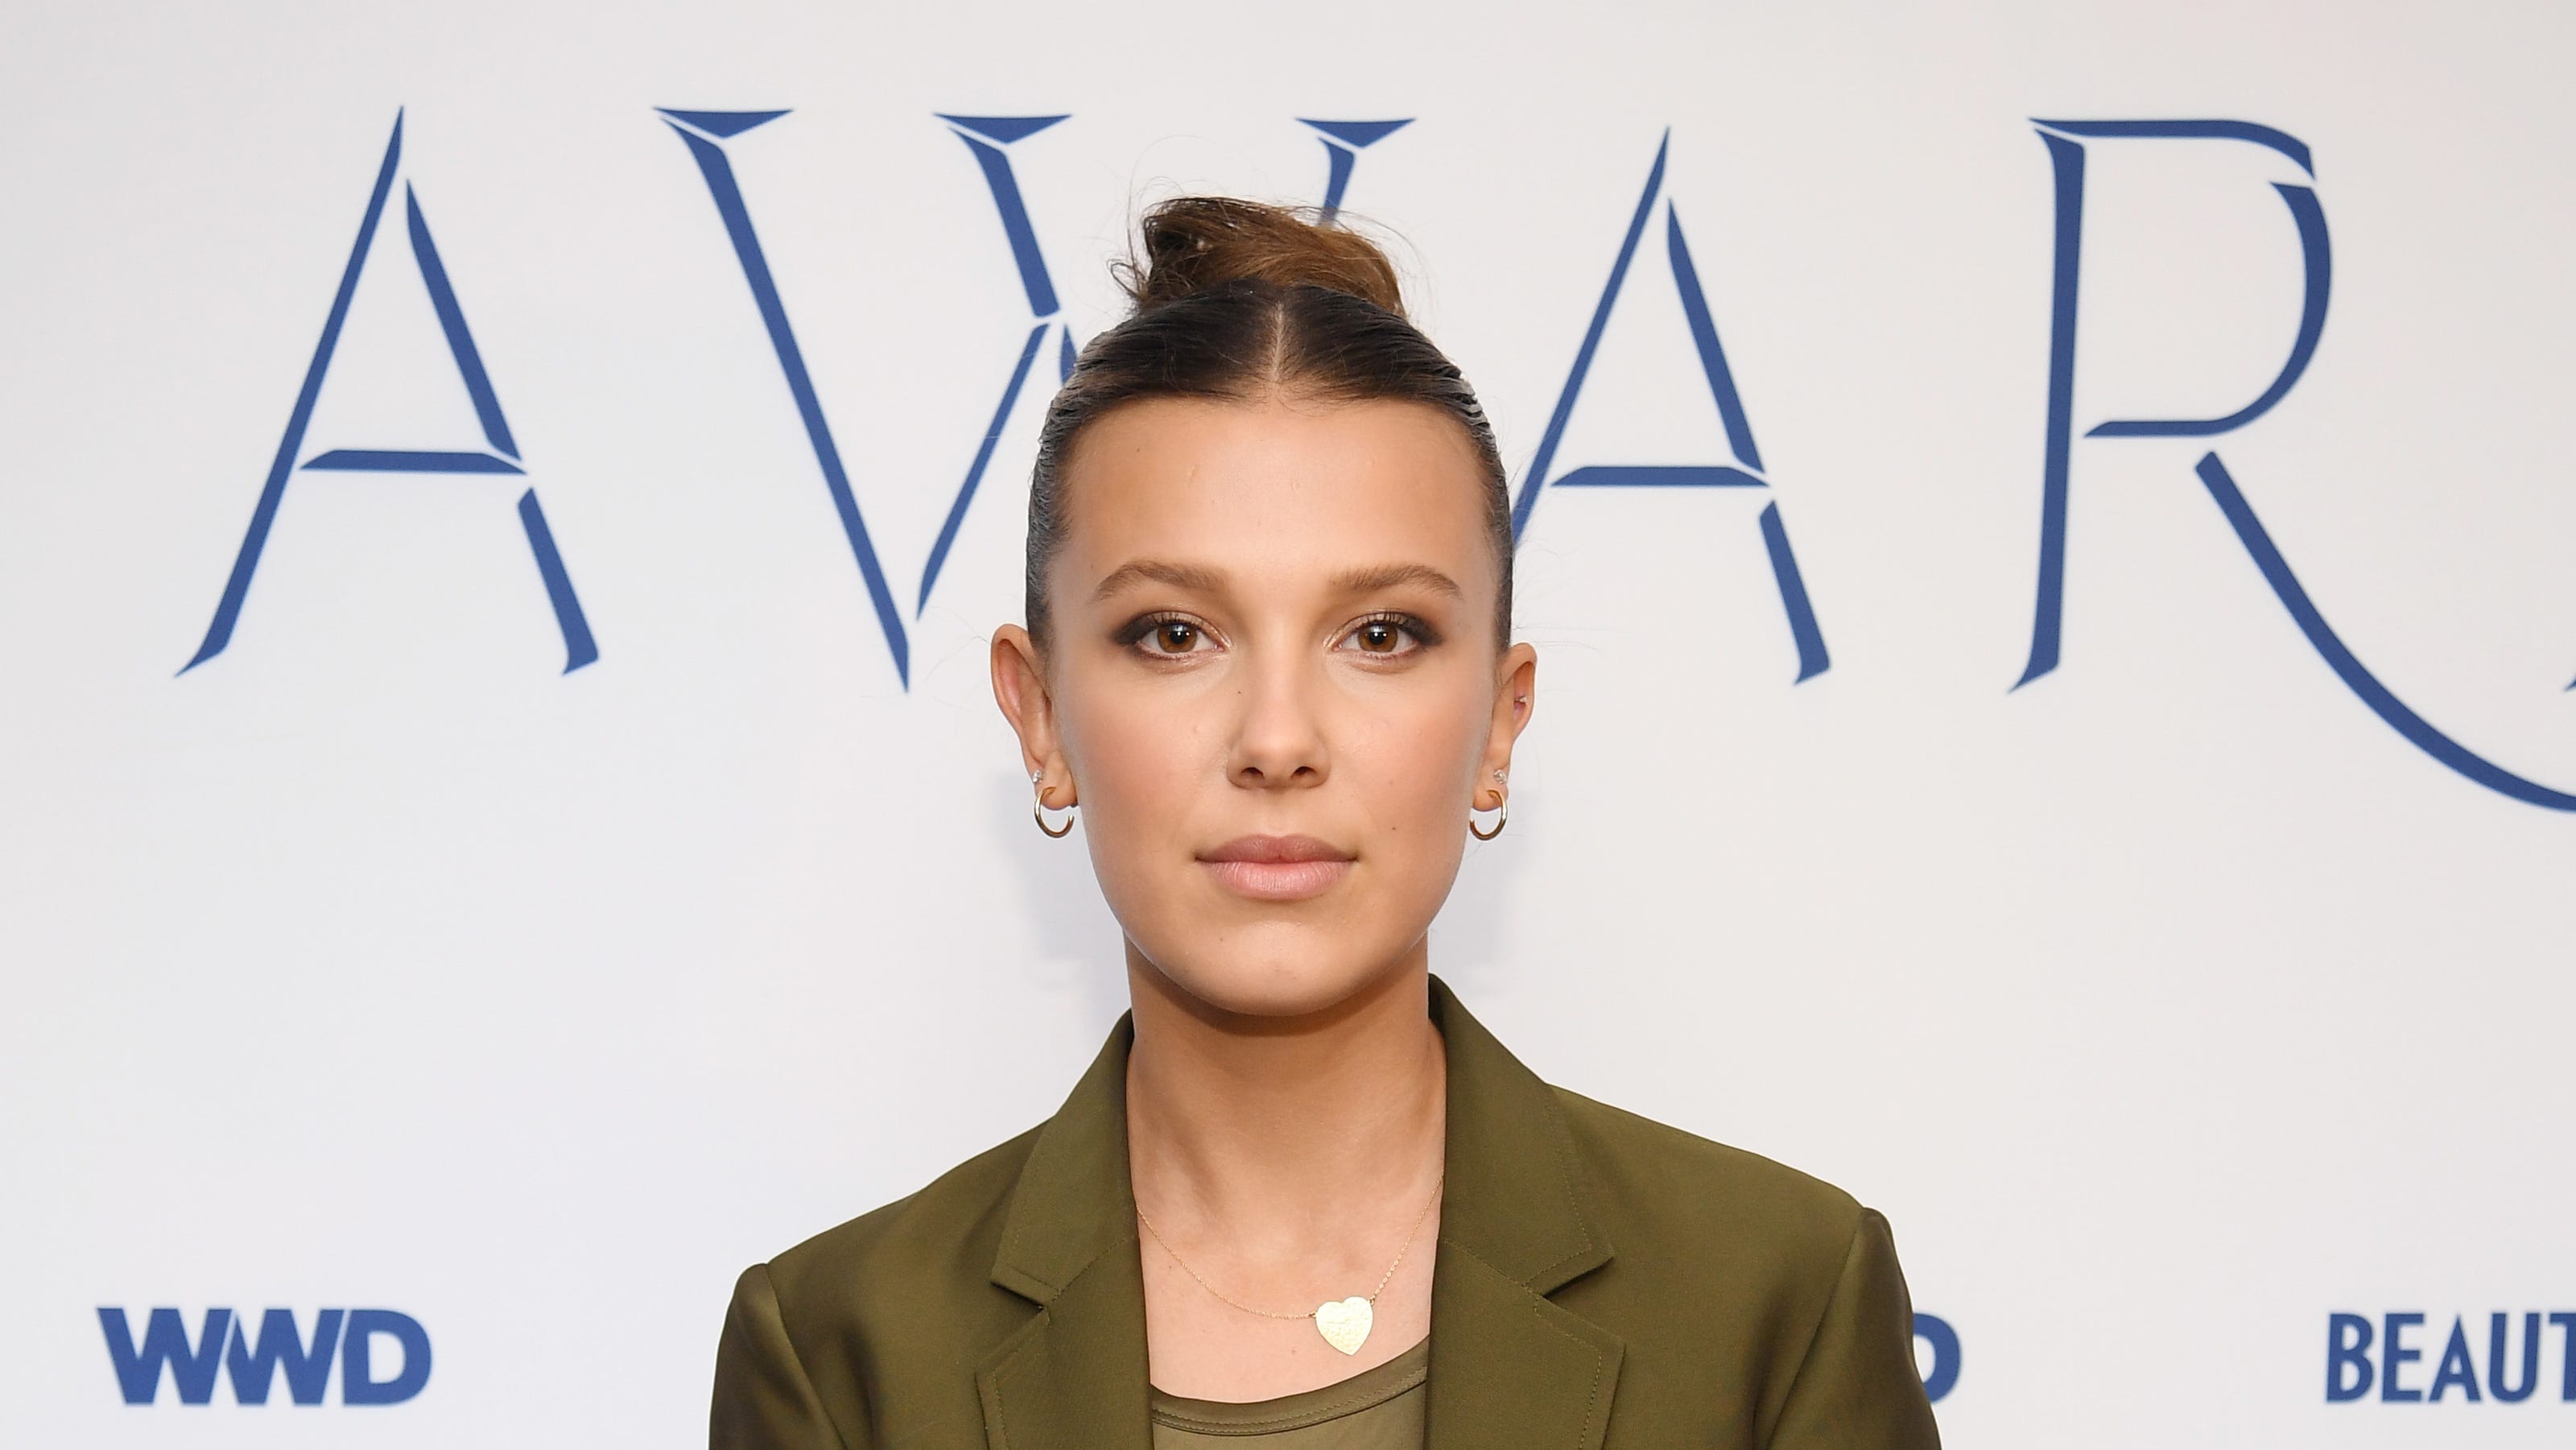 Millie Bobby Brown tearfully recalls 'uncomfortable' fan encounter: 'I'm a human being' - USA TODAY